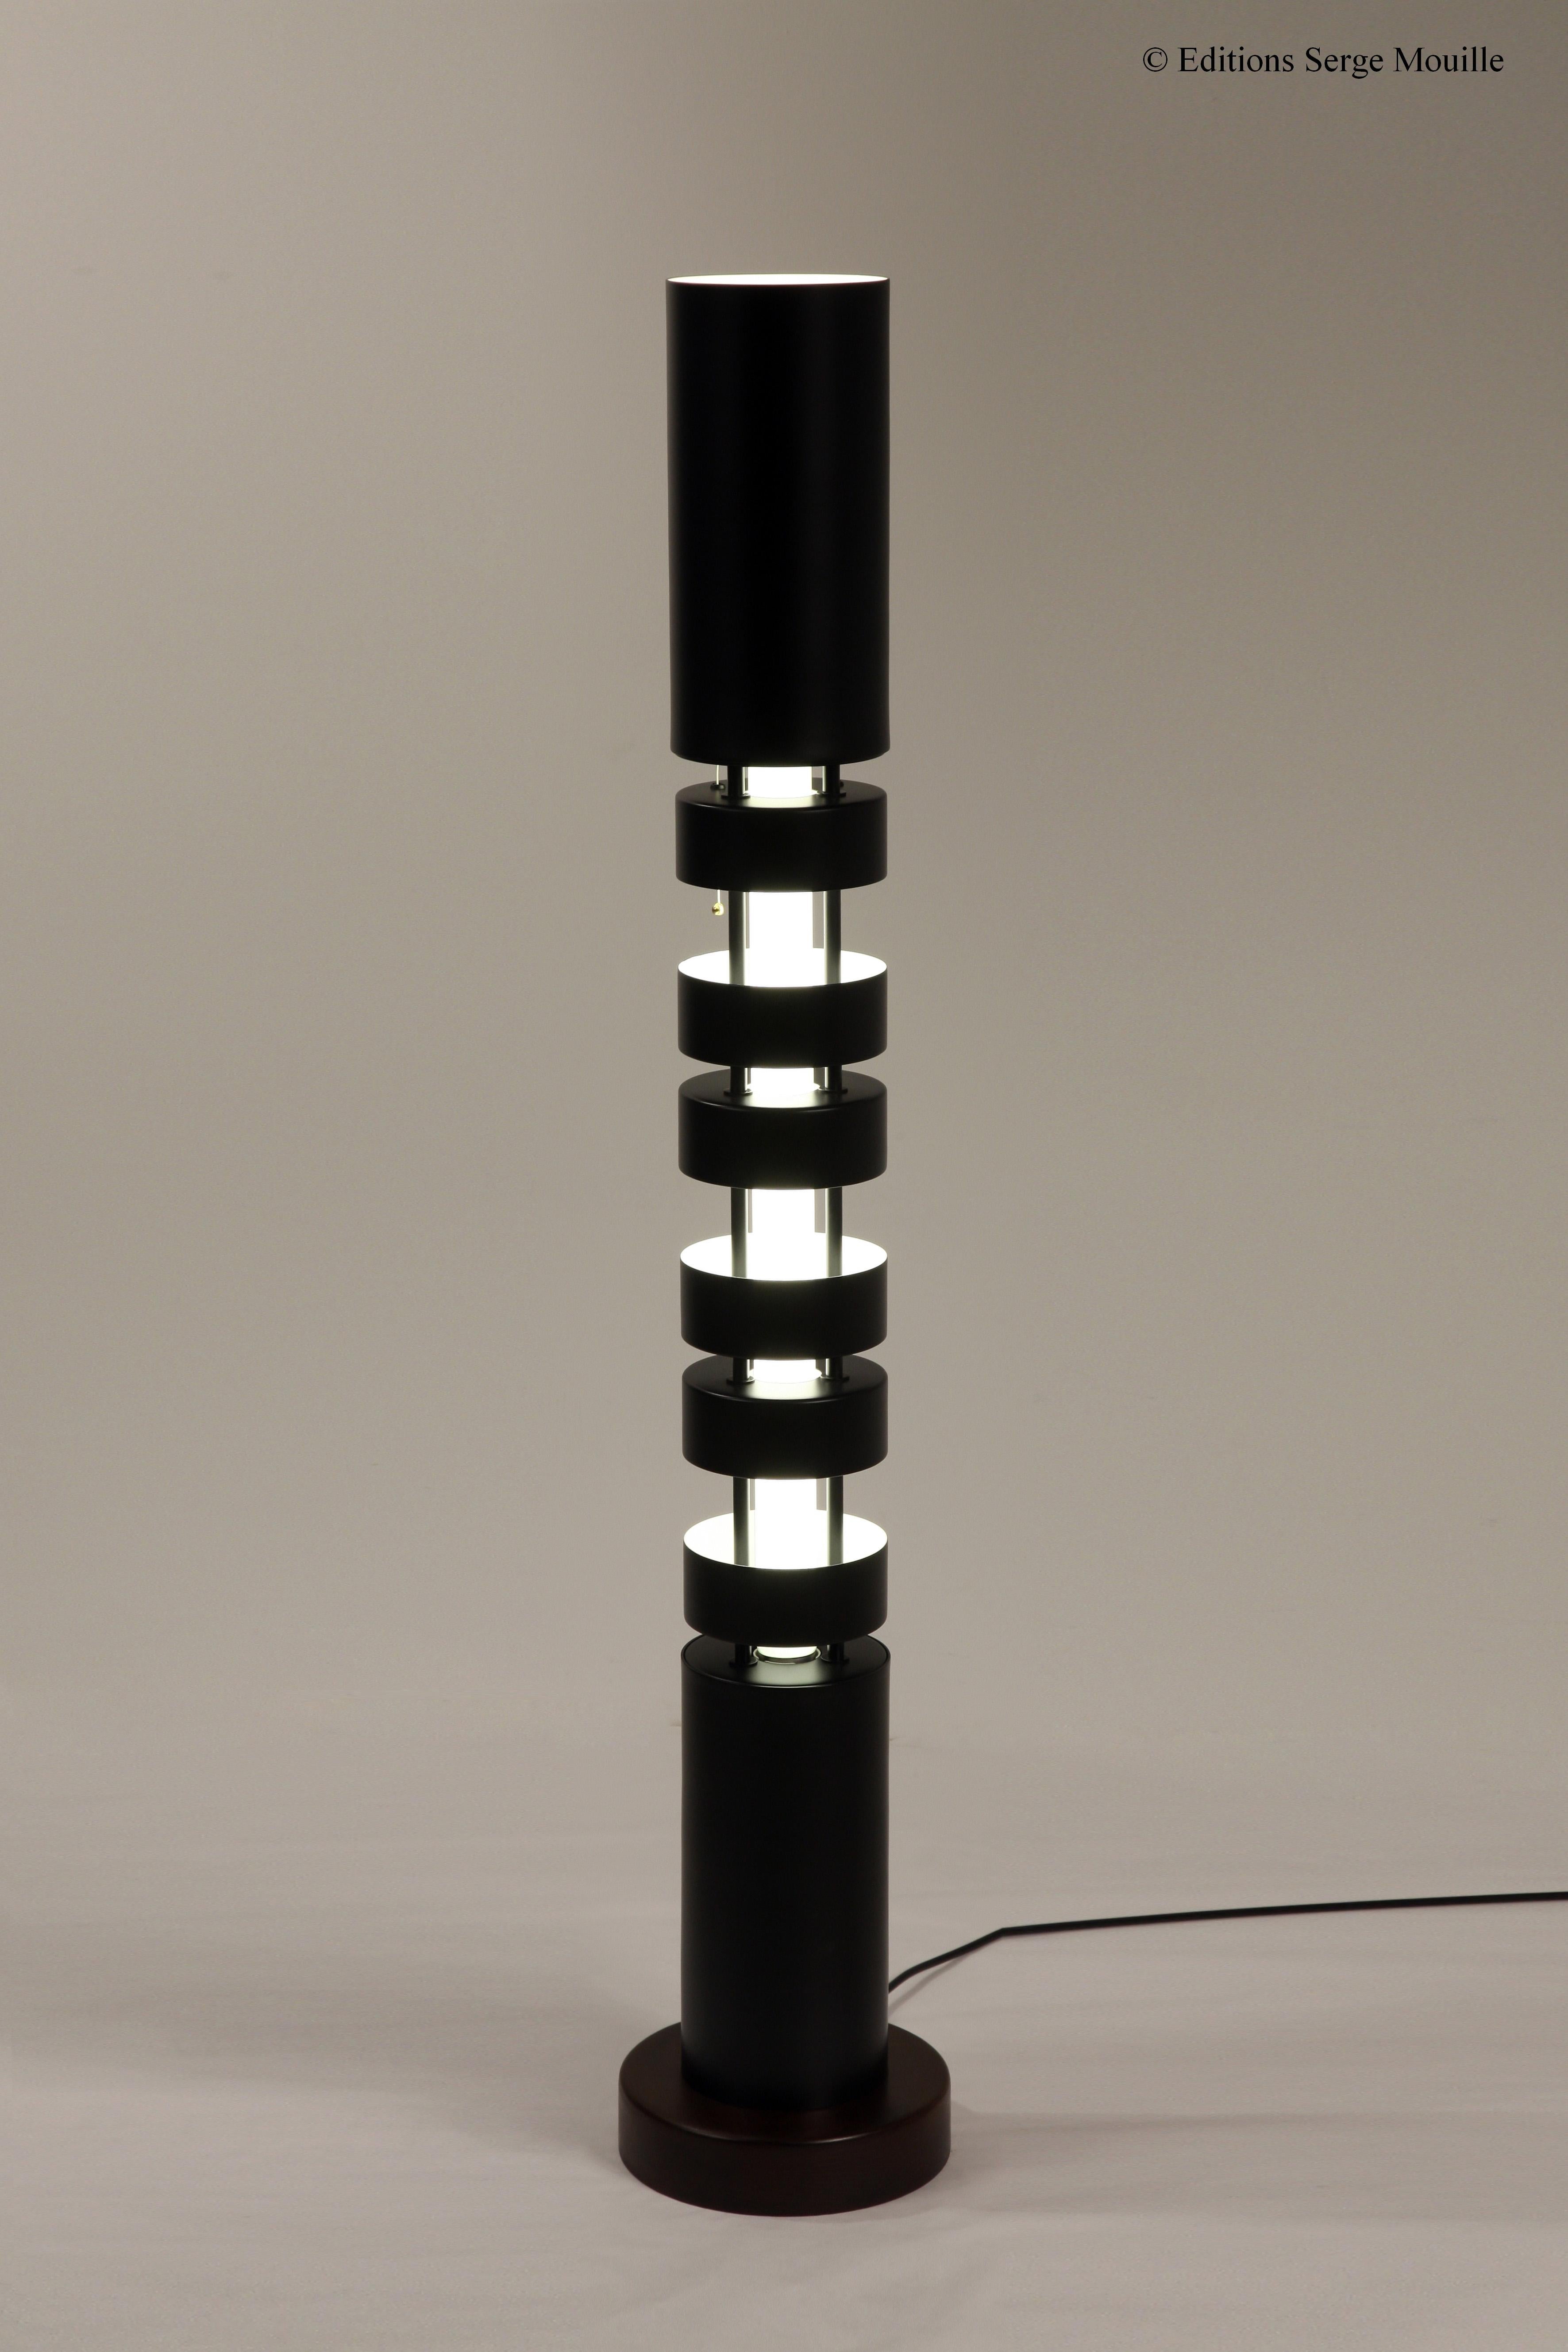 Column lamp small totem by Serge Mouille
Dimensions: D16 x H117 cm
Materials: Steel, Glass
One of a King. Numbered.
Also available in different color and dimensions.

All our lamps can be wired according to each country. If sold to the USA it